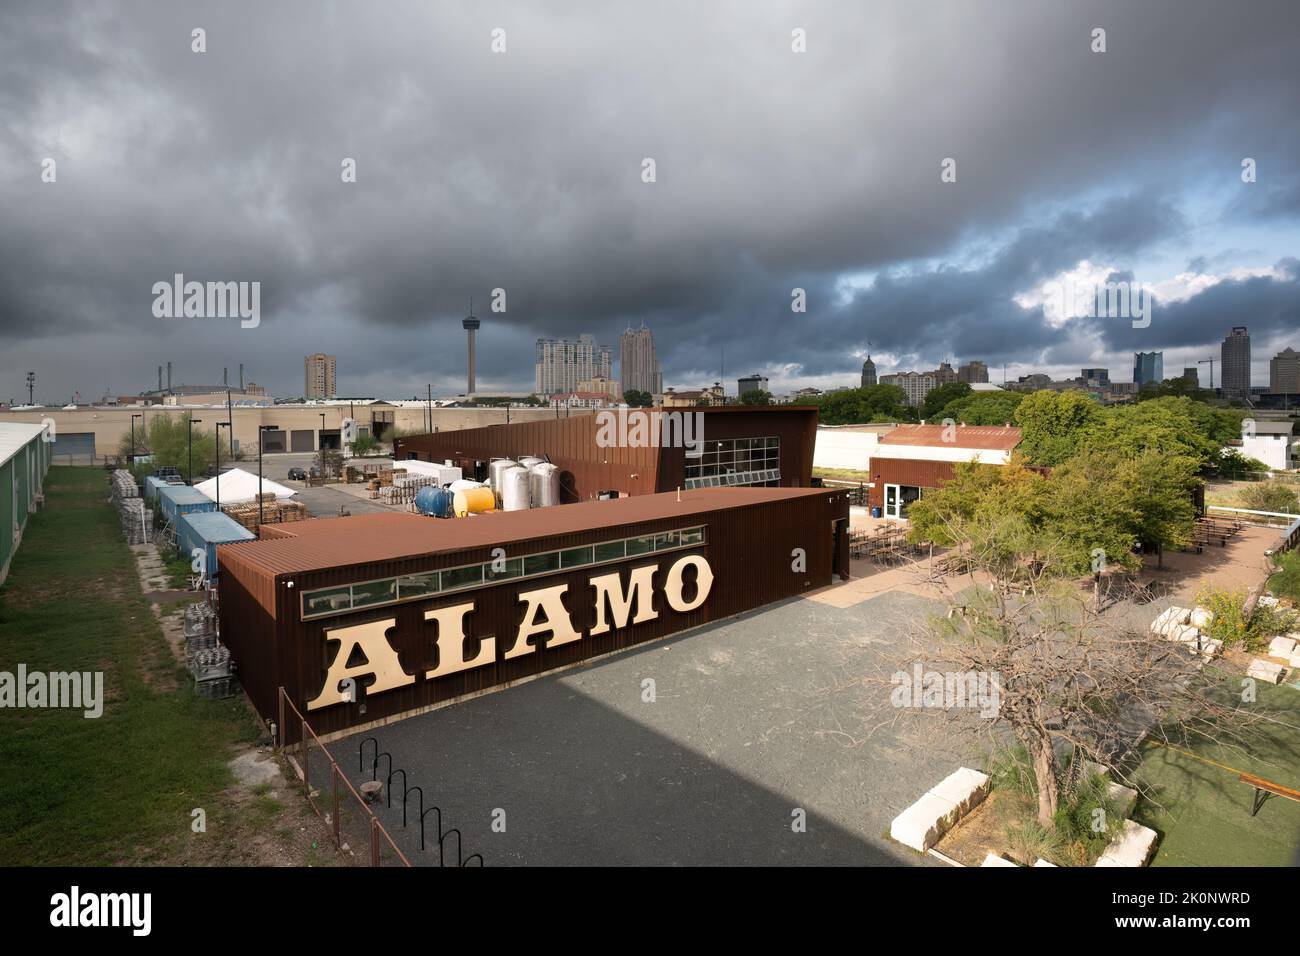 A storm rolls into San Antonio, Texas, as seen from the Hays Street Bridge with Alamo Beer Company in the foreground. Stock Photo